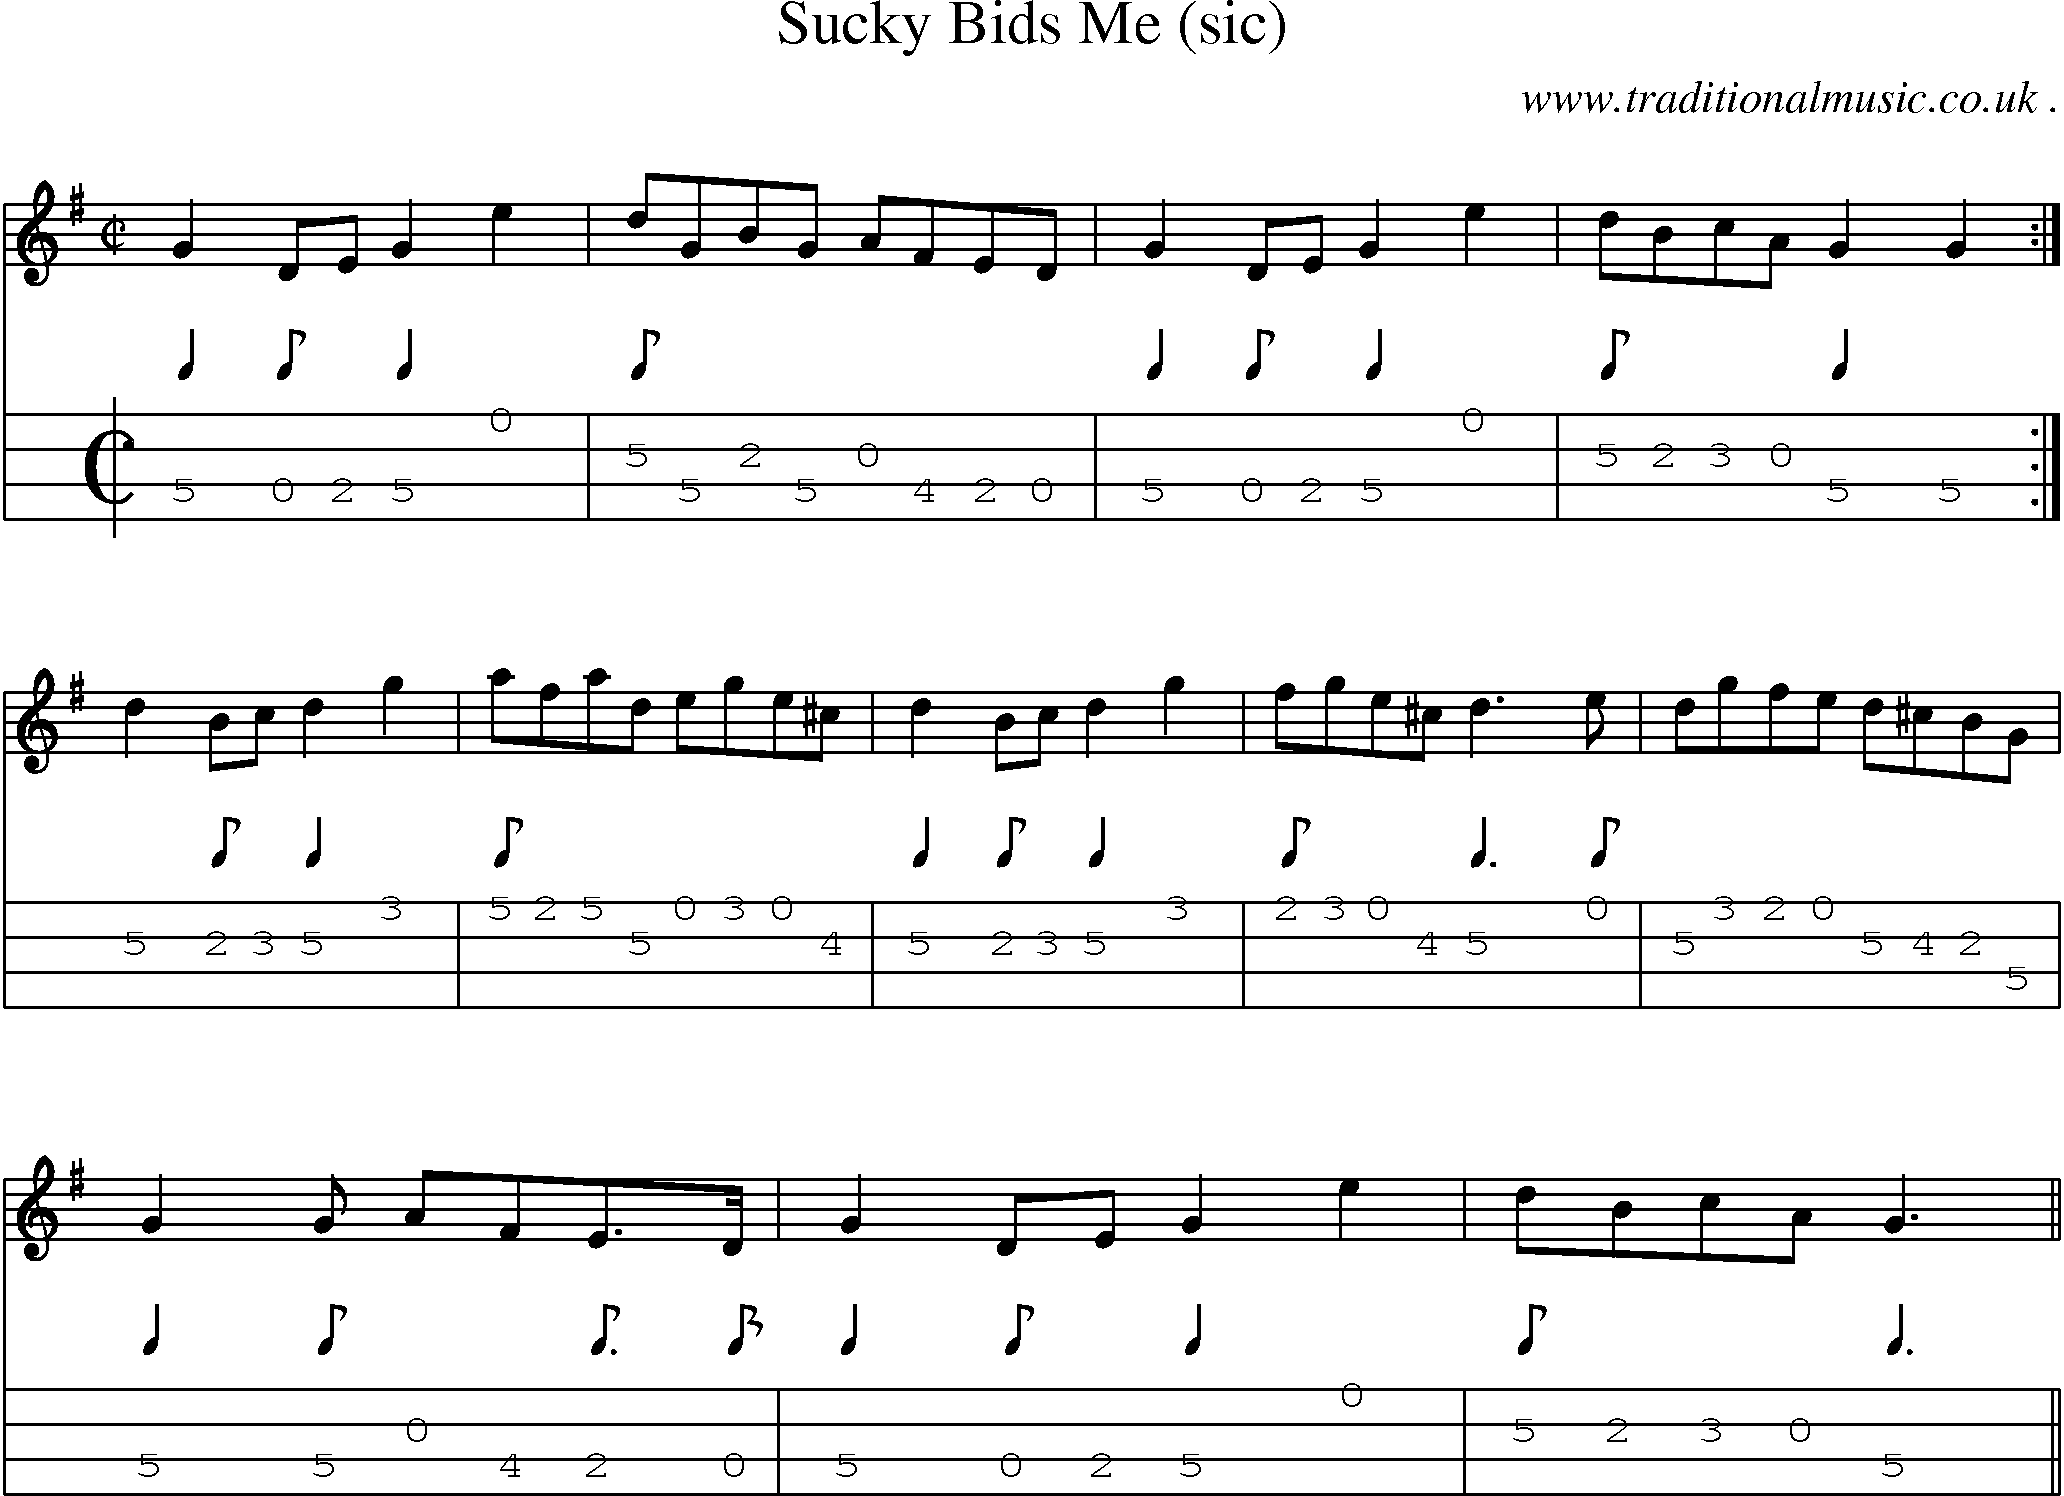 Sheet-music  score, Chords and Mandolin Tabs for Sucky Bids Me Sic